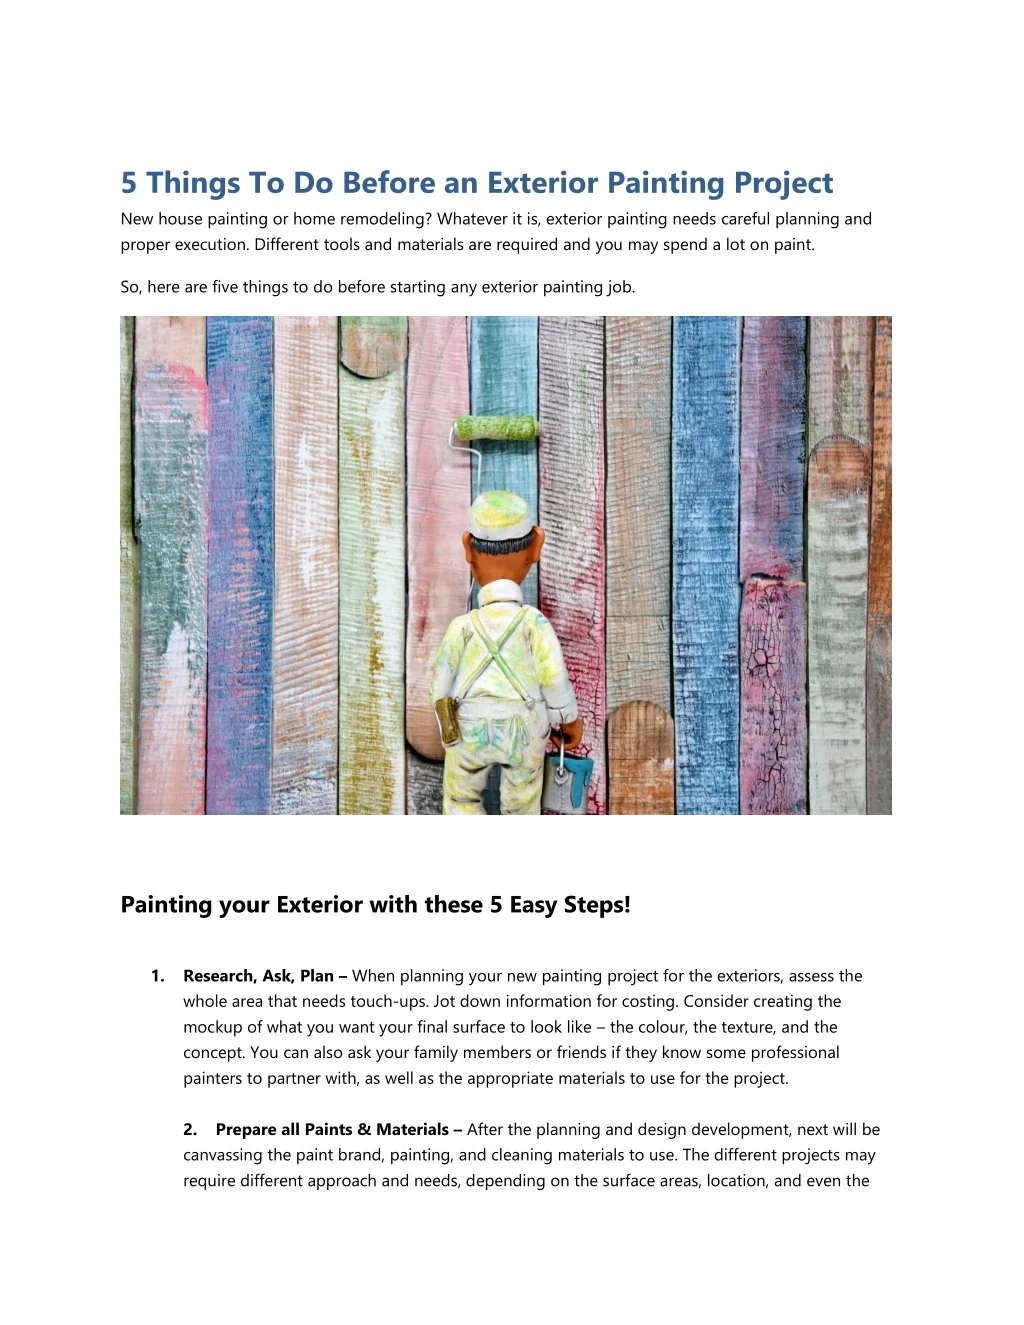 5 things to do before an exterior painting